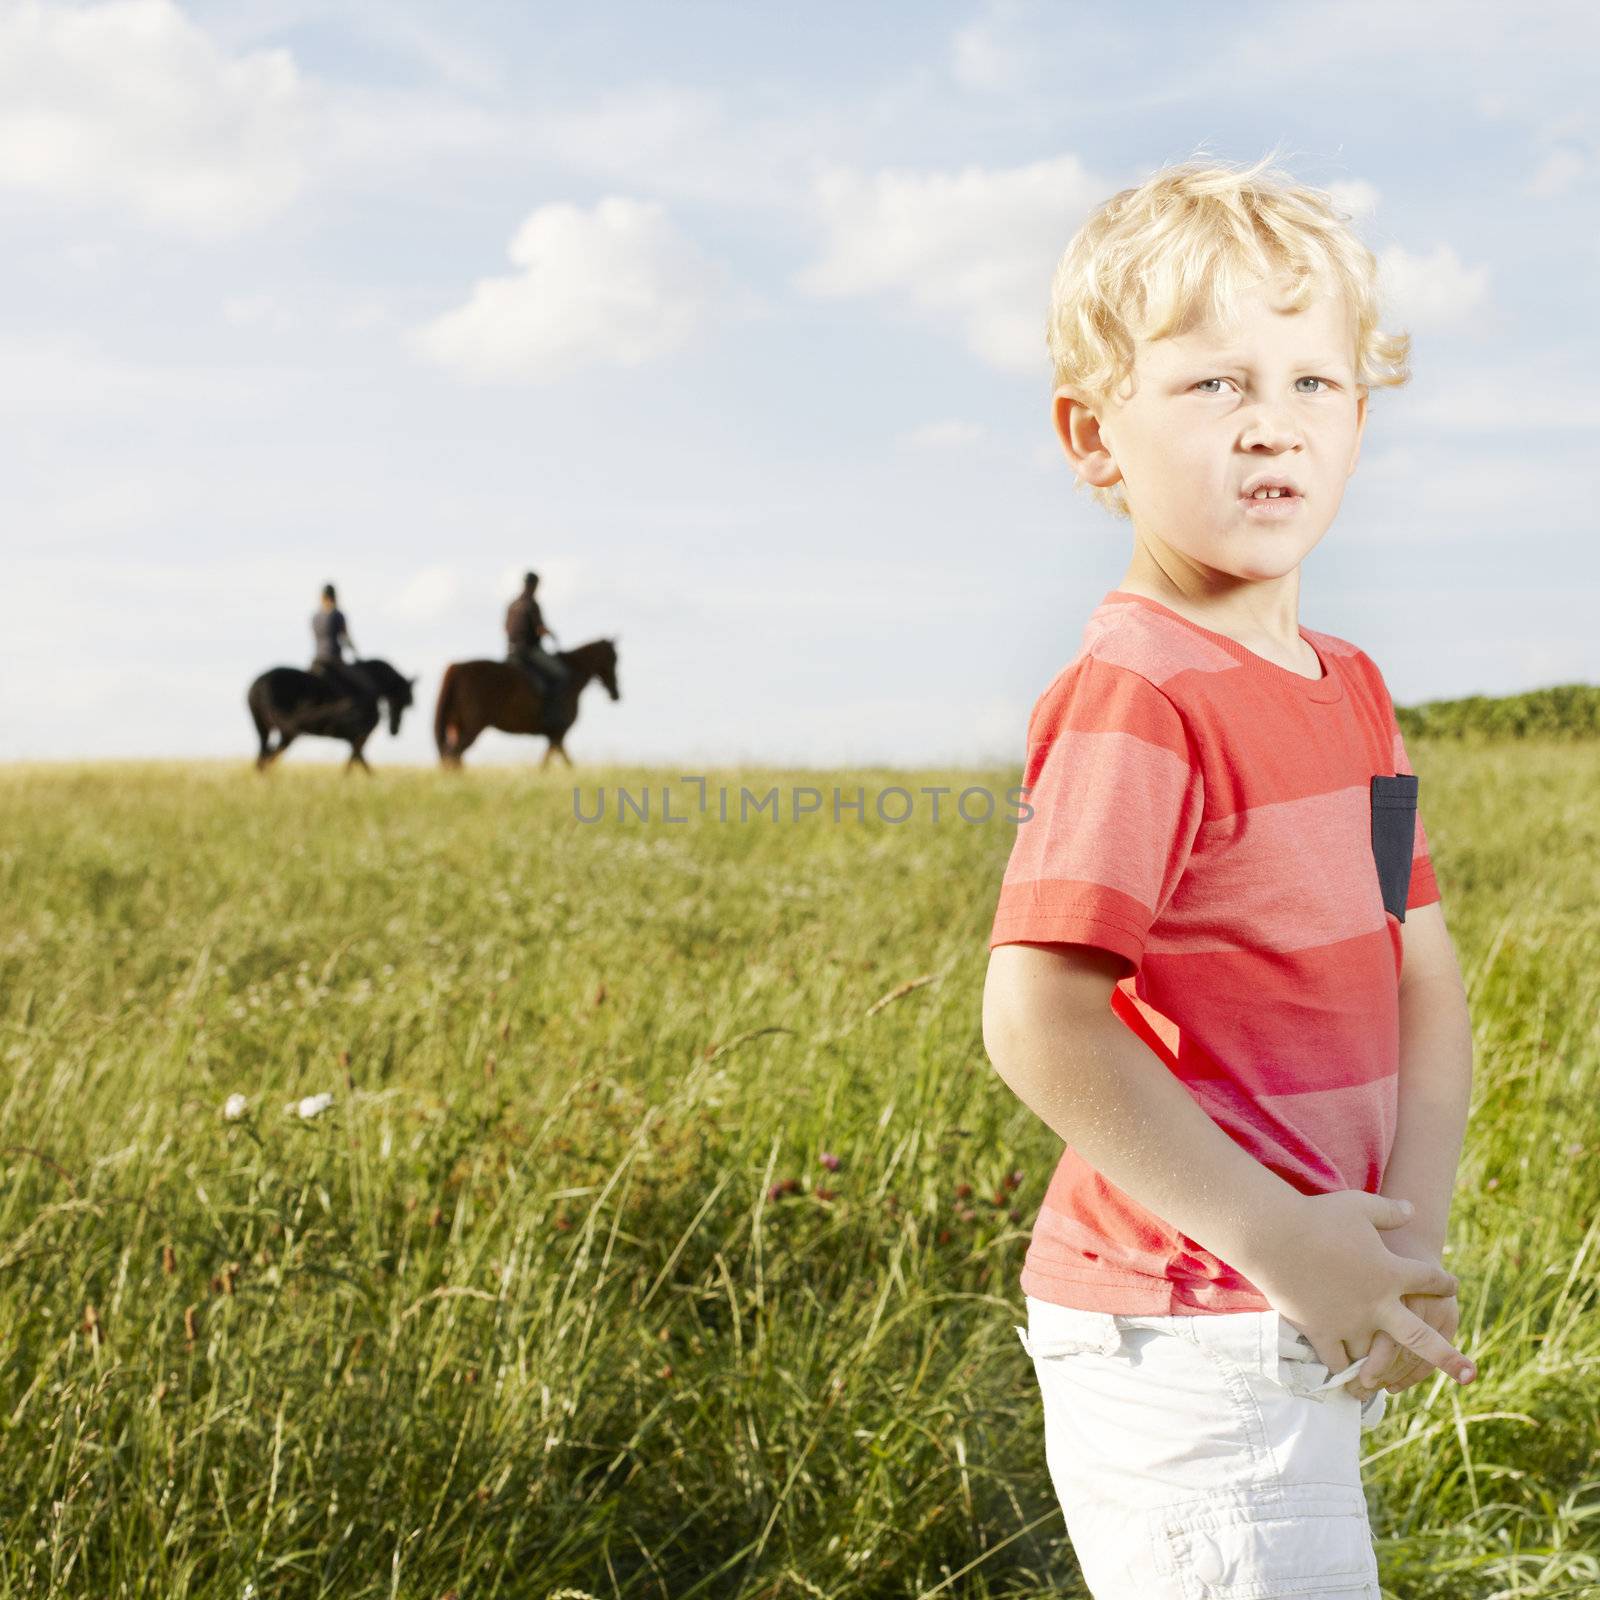 Young blonde boy standing in a grassy field with two horse riders silhouetted on the skyline in the background